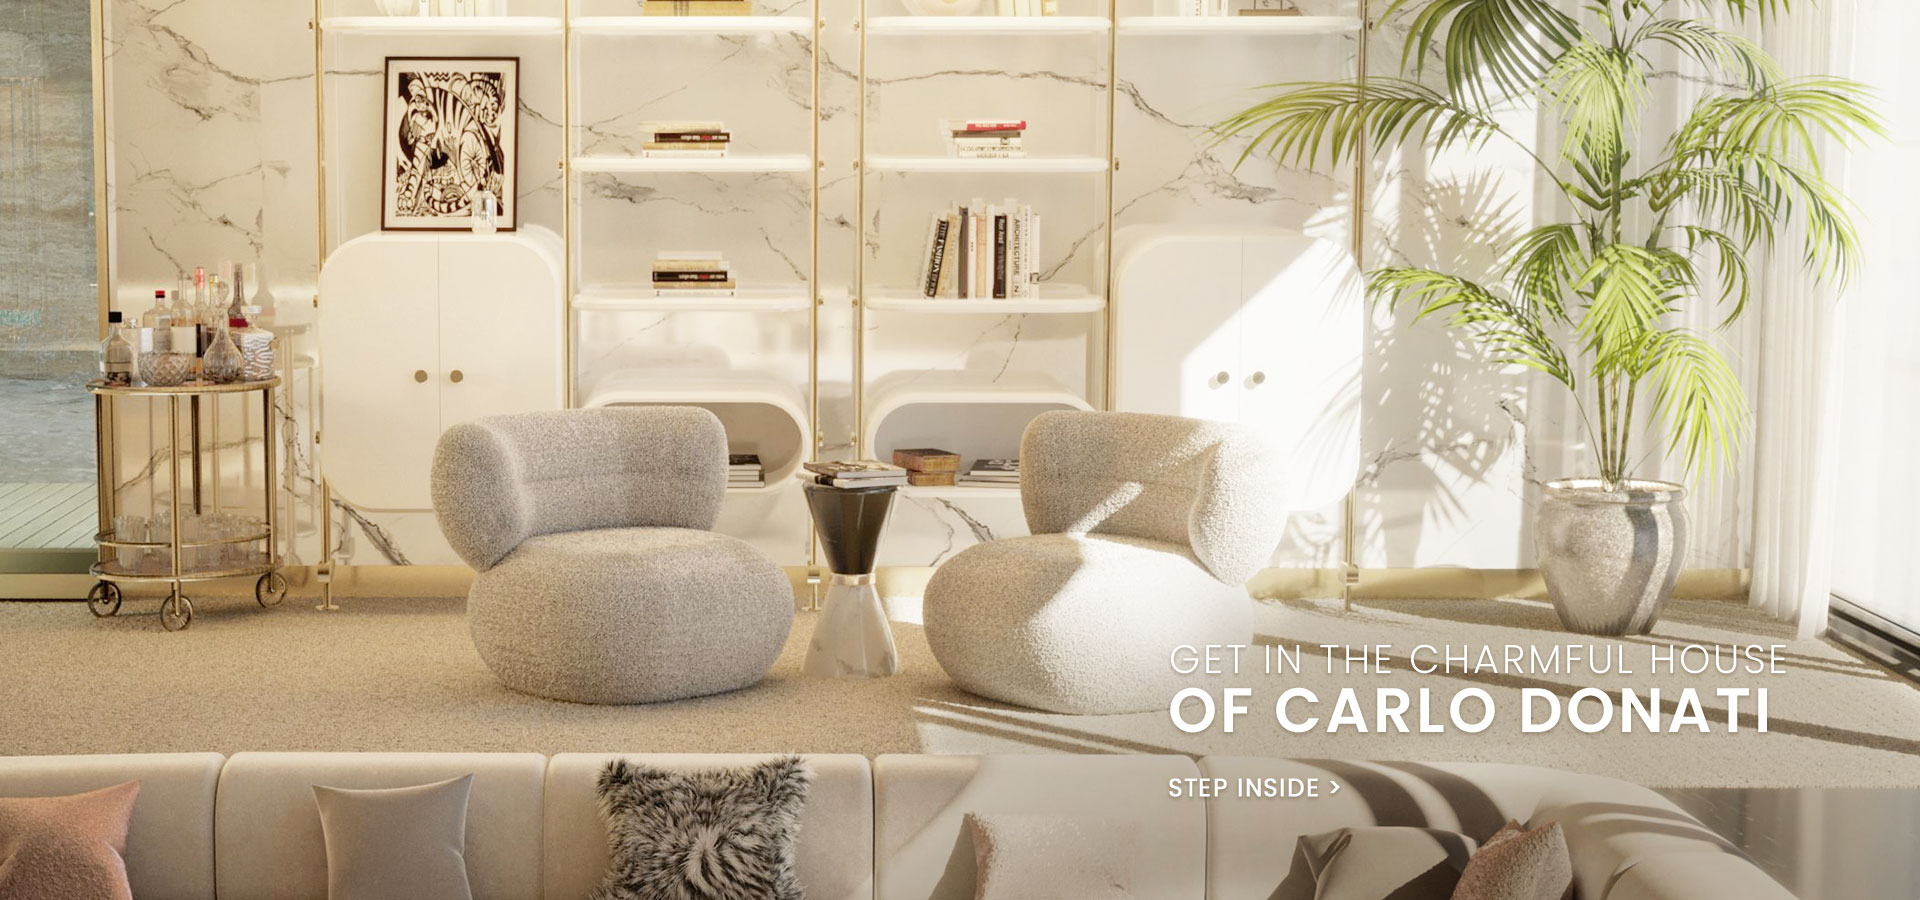 carlodonatihousevt twist magazine The 4th Edition of Twist Magazine is Finally Here (And You Can Download it for Free!) saint tropez carlo donati home